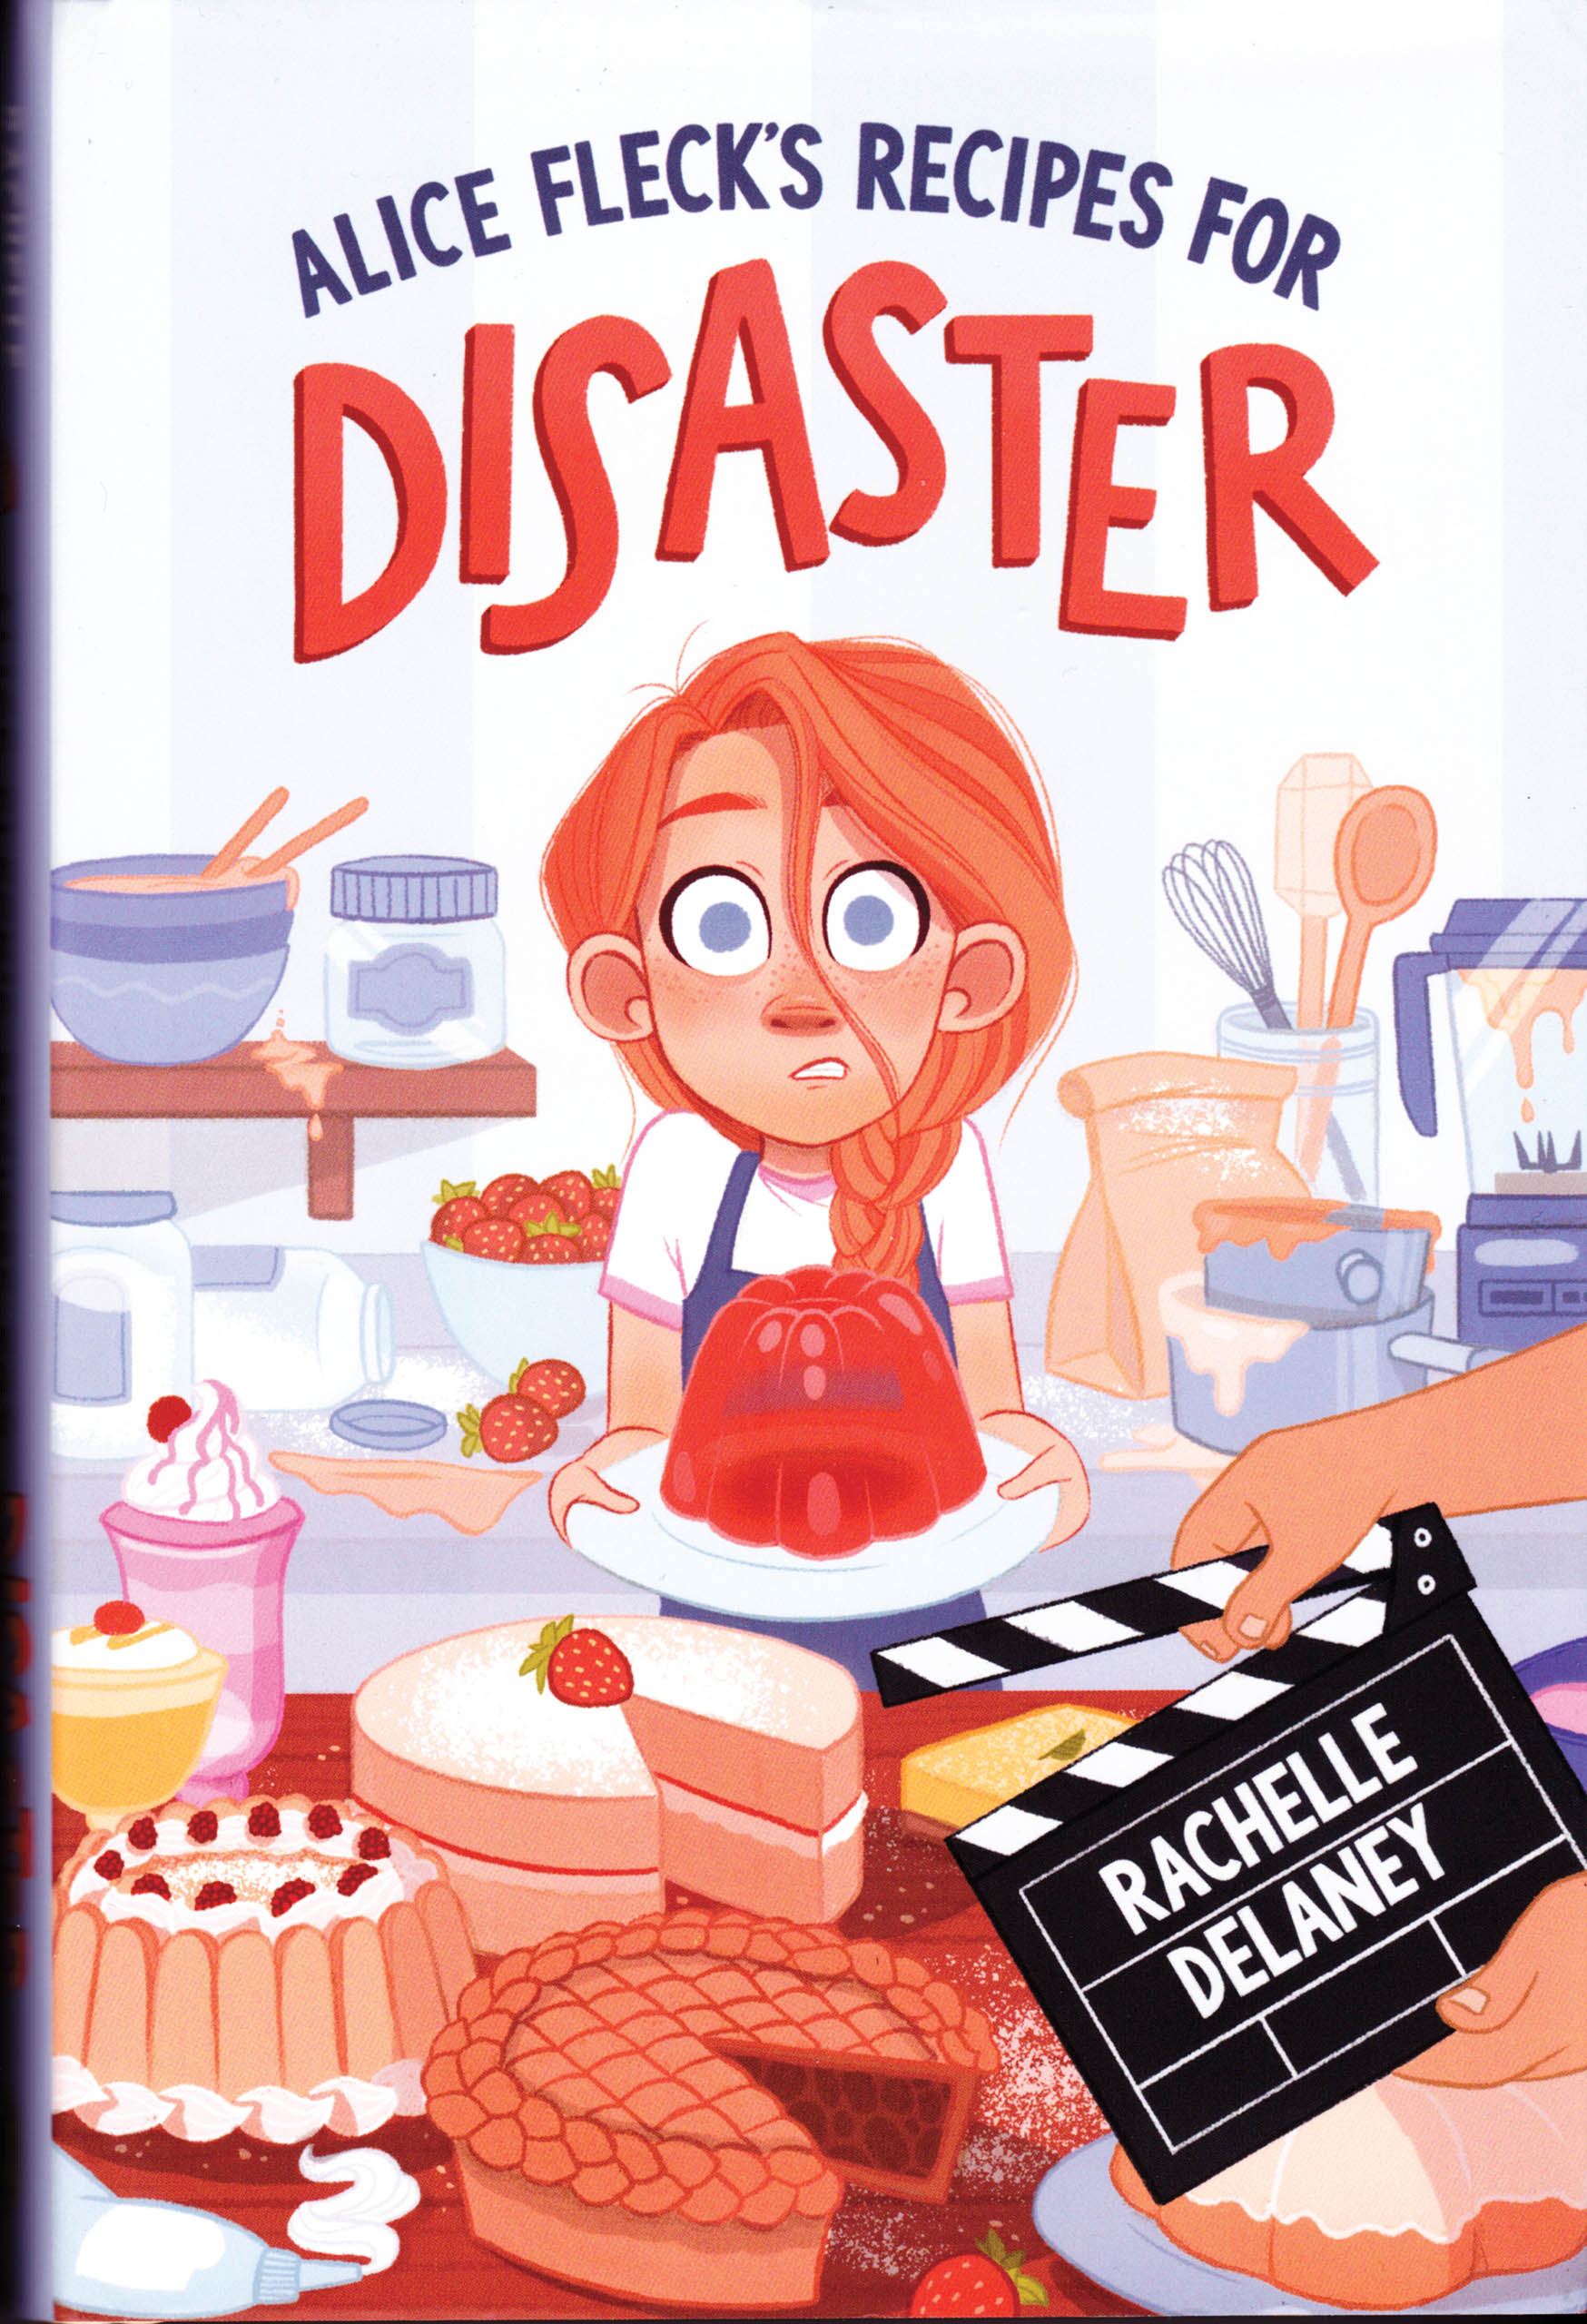 'Alice Fleck's Recipes for Disaster' book cover.